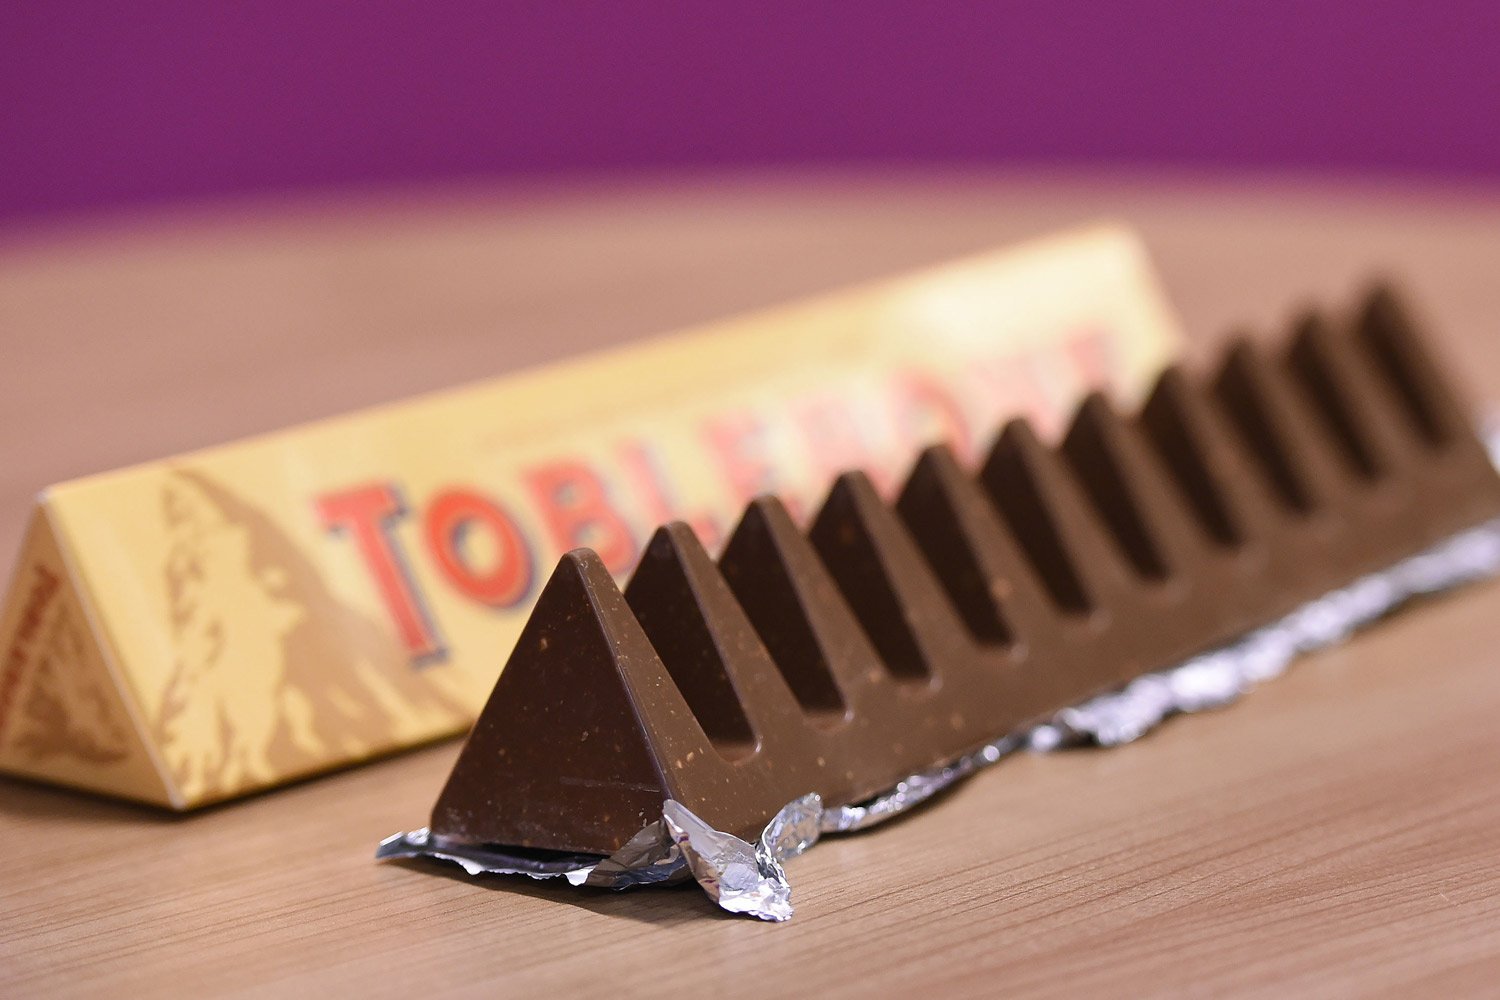 You got: Toblerone! Pick Desserts Around the World and We’ll Guess Your Favorite Chocolate Brand 🍫